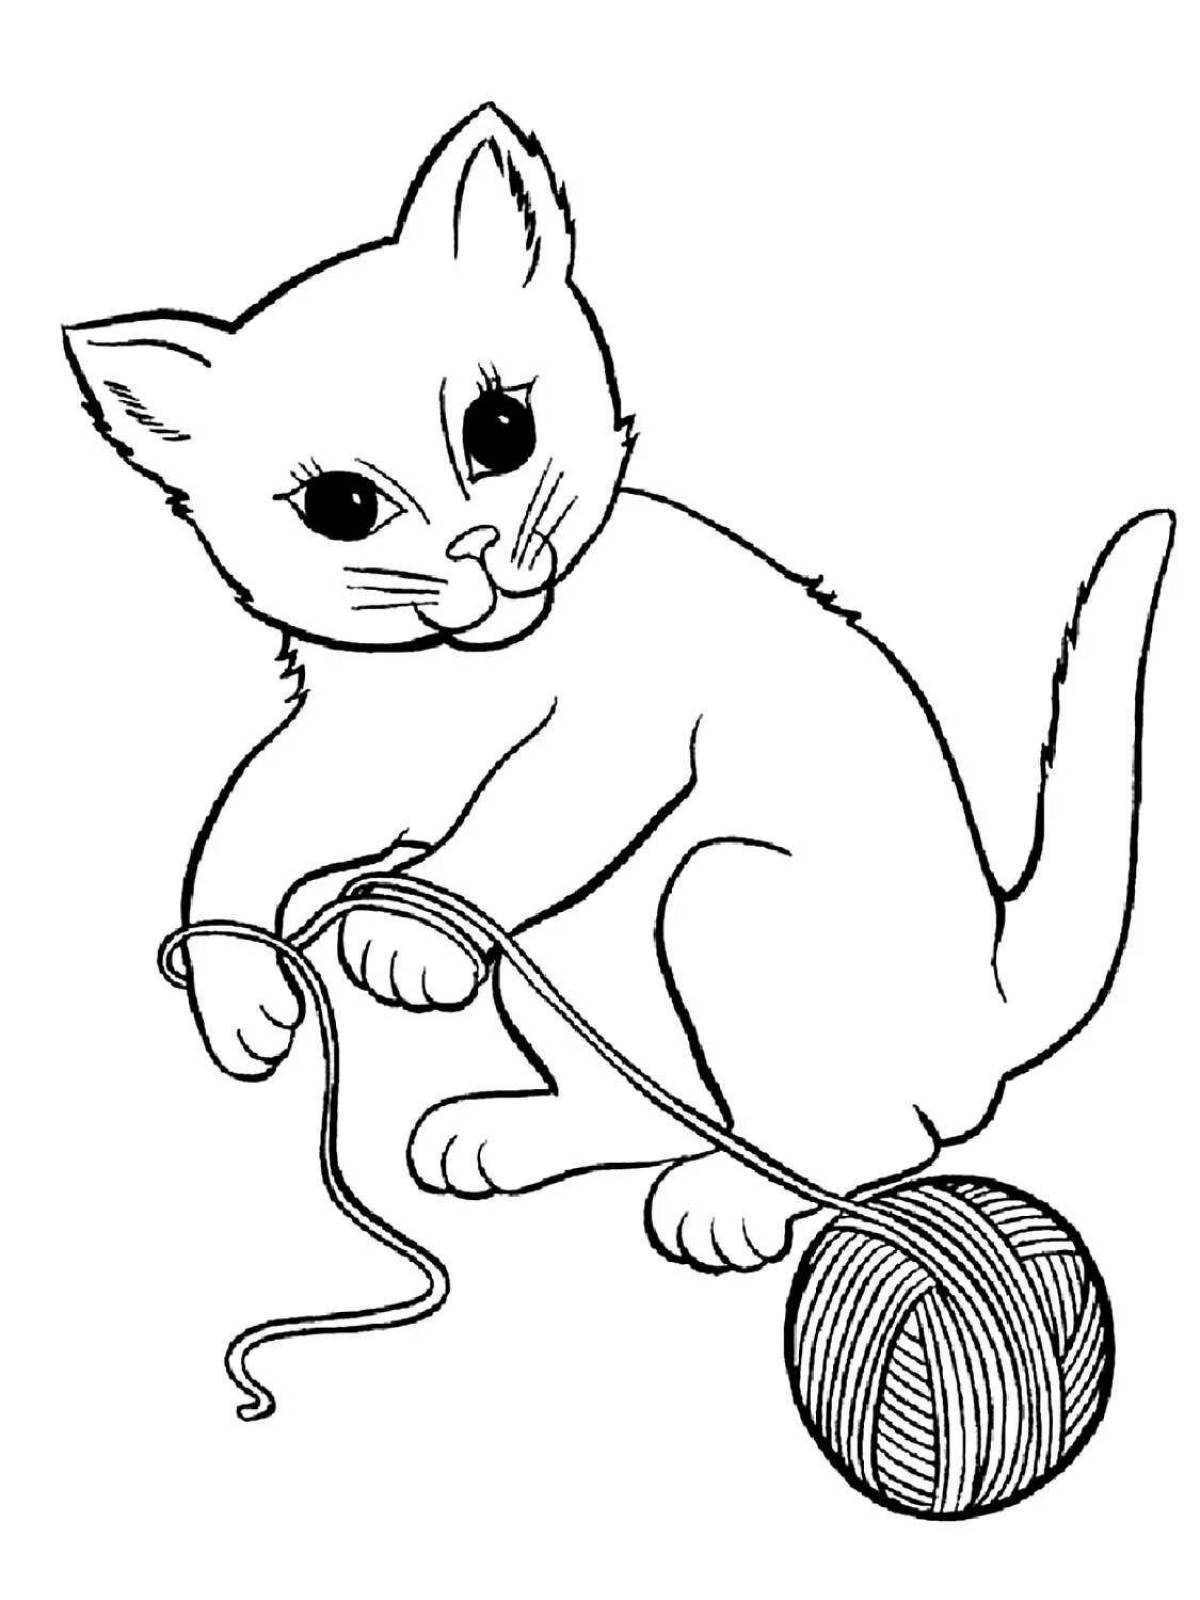 Coloring book shining cat with a ball